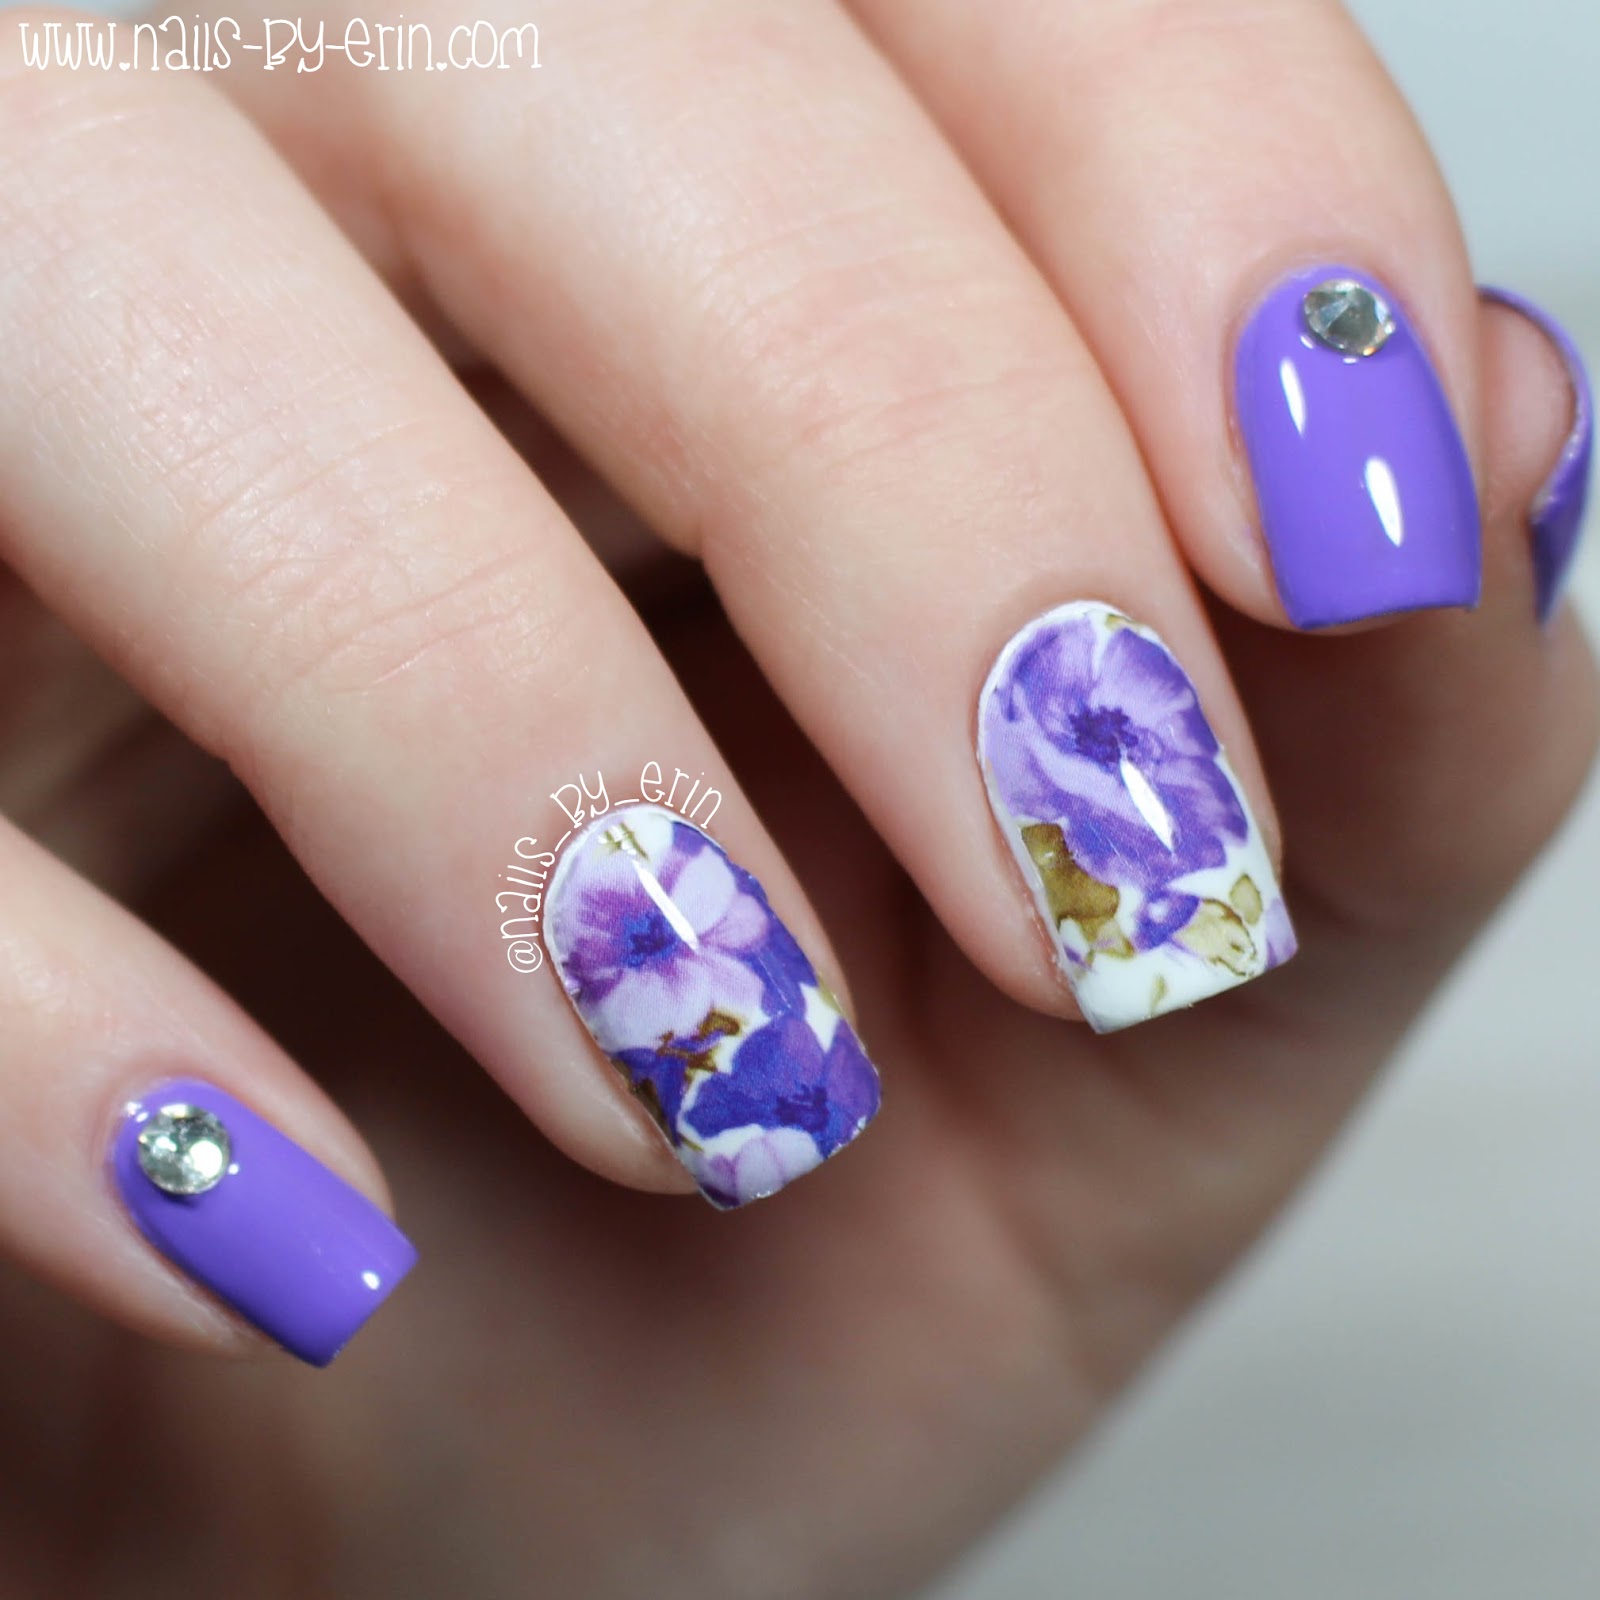 NailsByErin: Purple Floral Water Decal Nails | Born Pretty Store Review